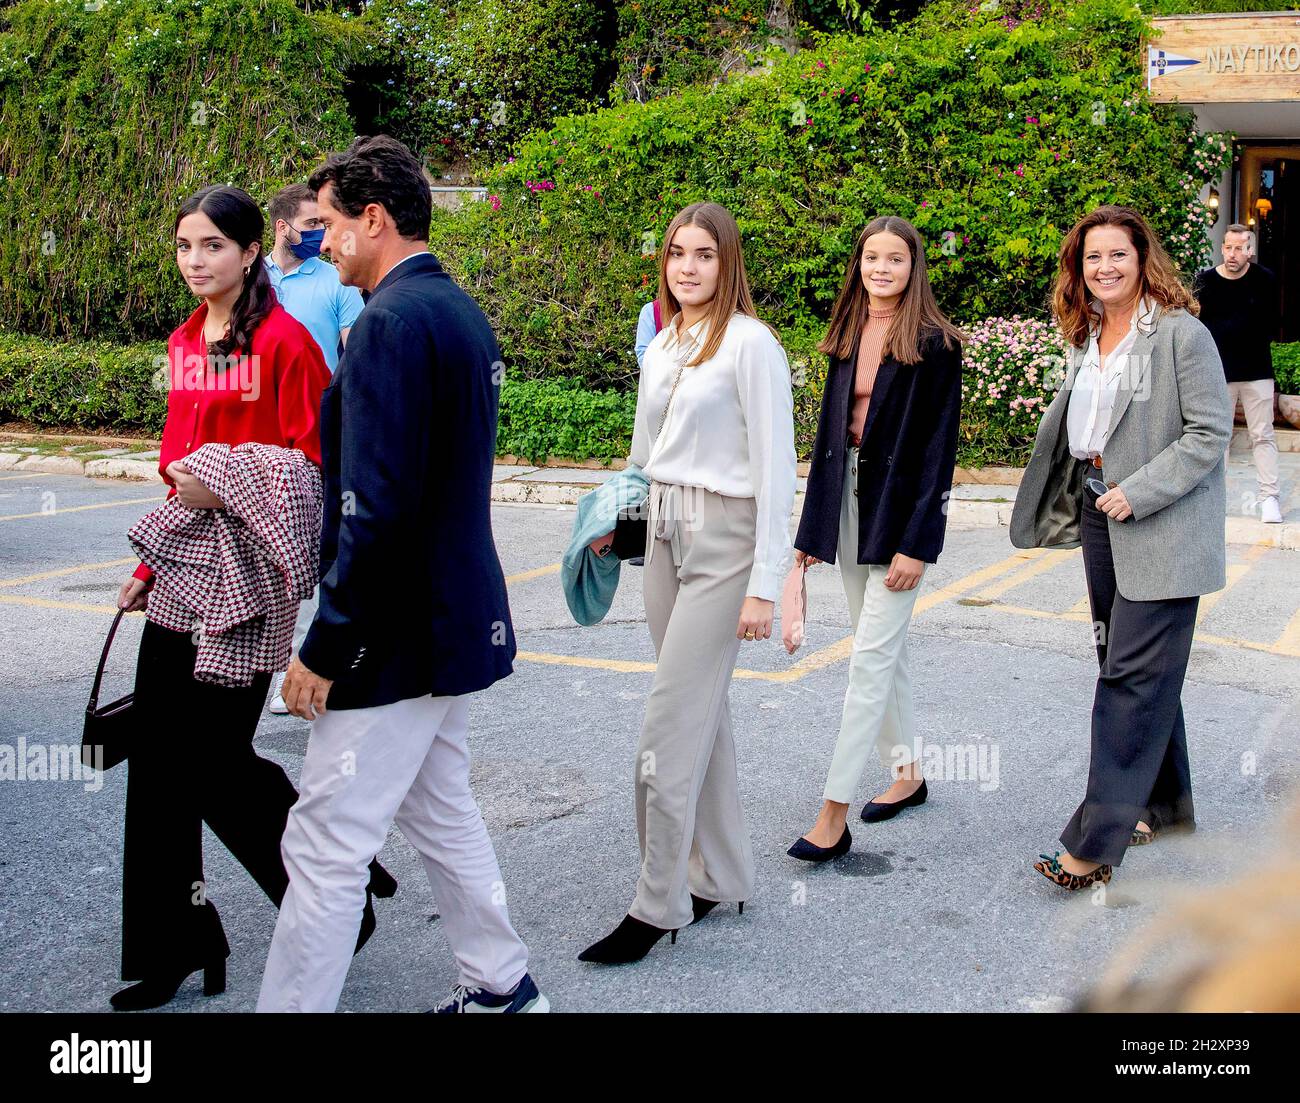 Carlos Morales Quintana High Resolution Stock Photography and Images - Alamy